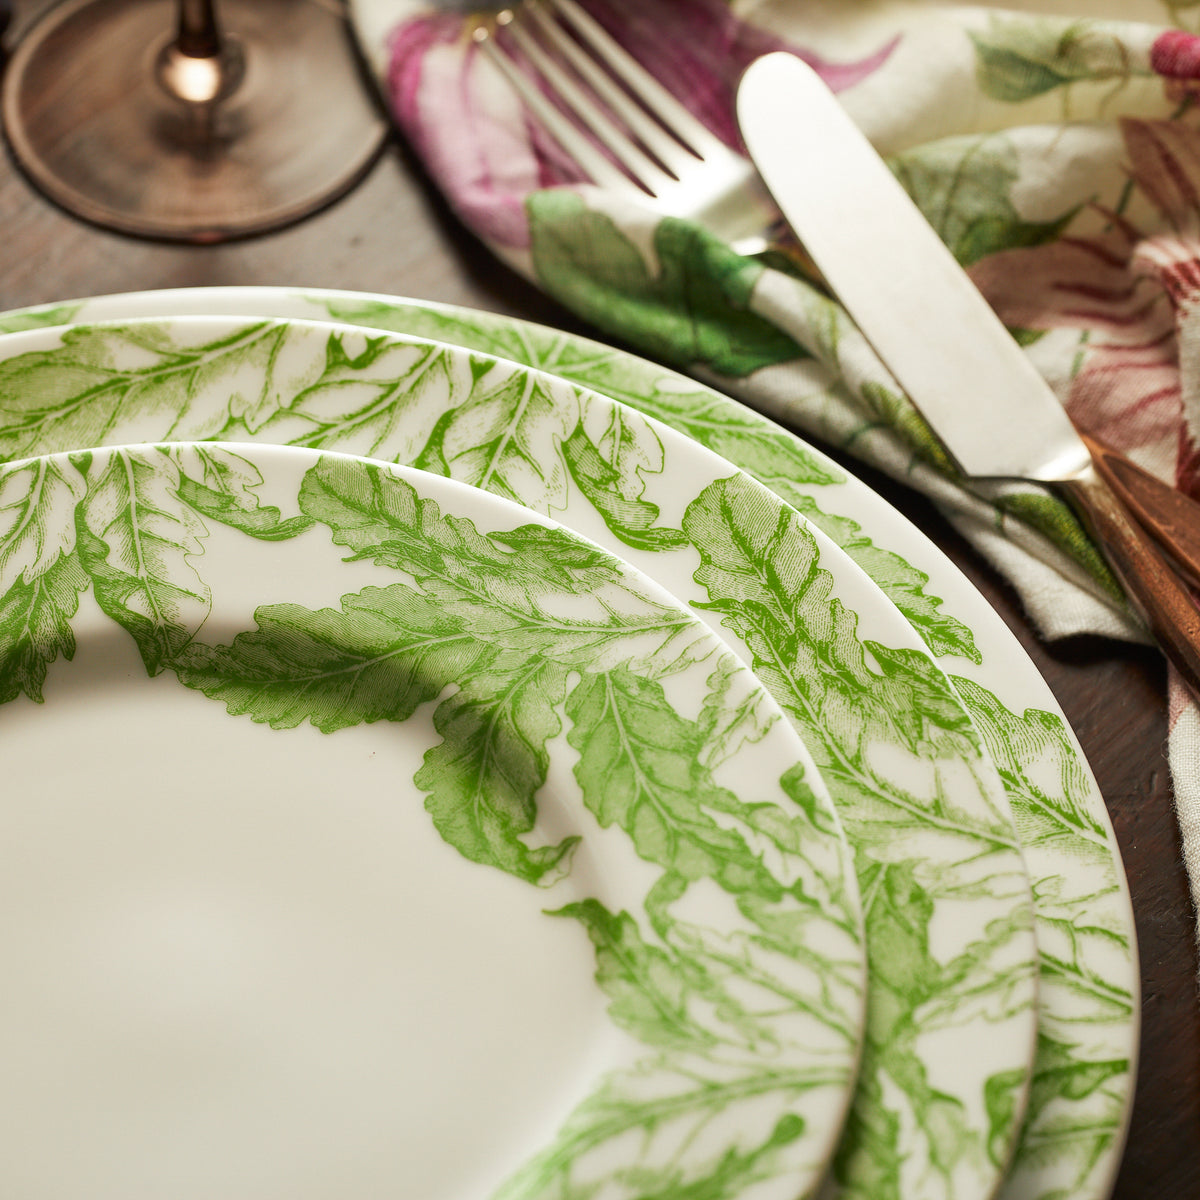 A Freya Rimmed Salad Plate by Caskata Artisanal Home with green leaves and a fork on a table made of porcelain.